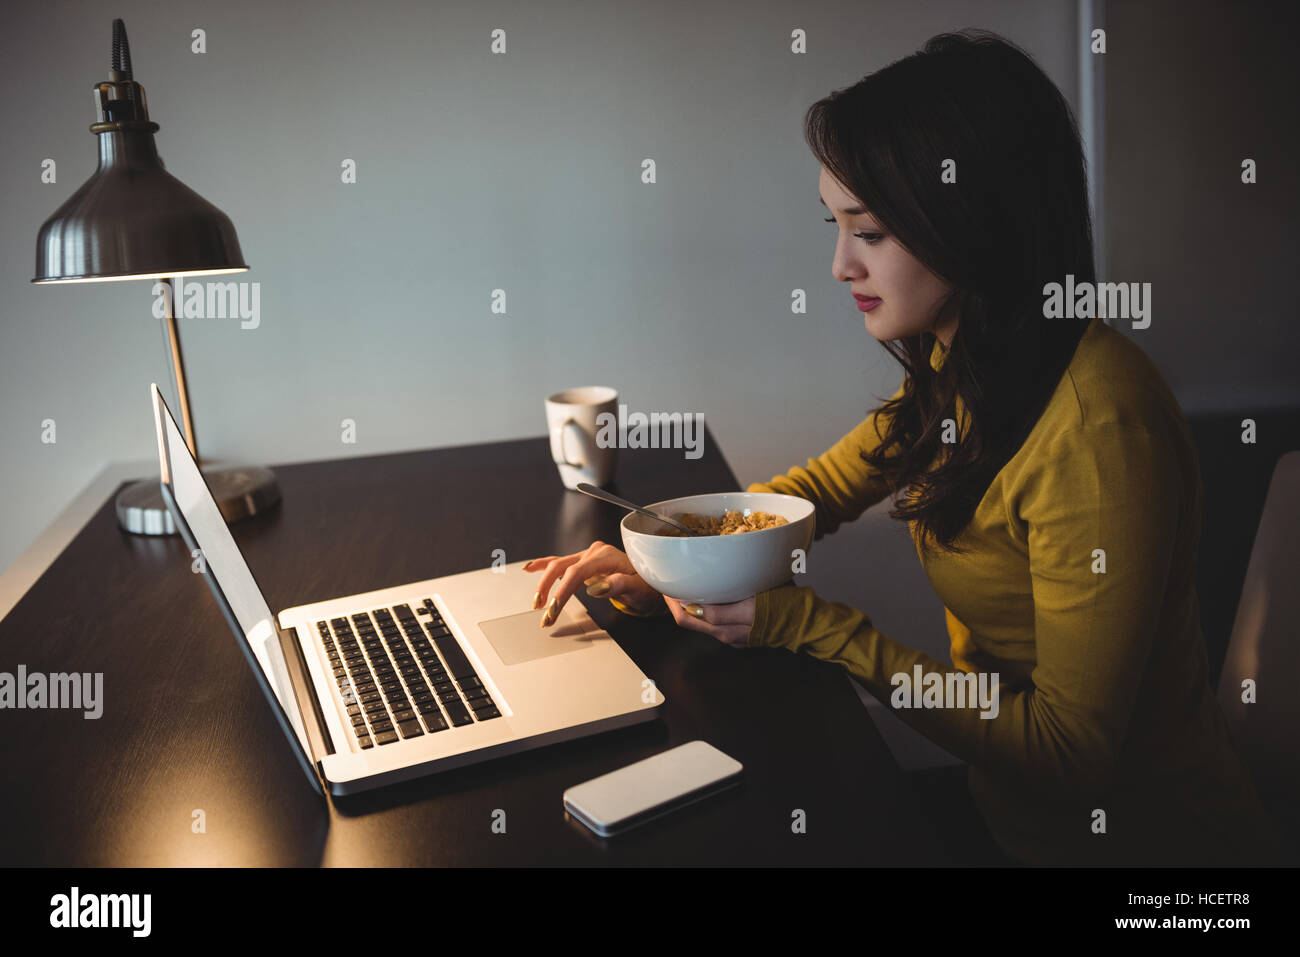 Woman eating cereal while working on laptop in study room Stock Photo